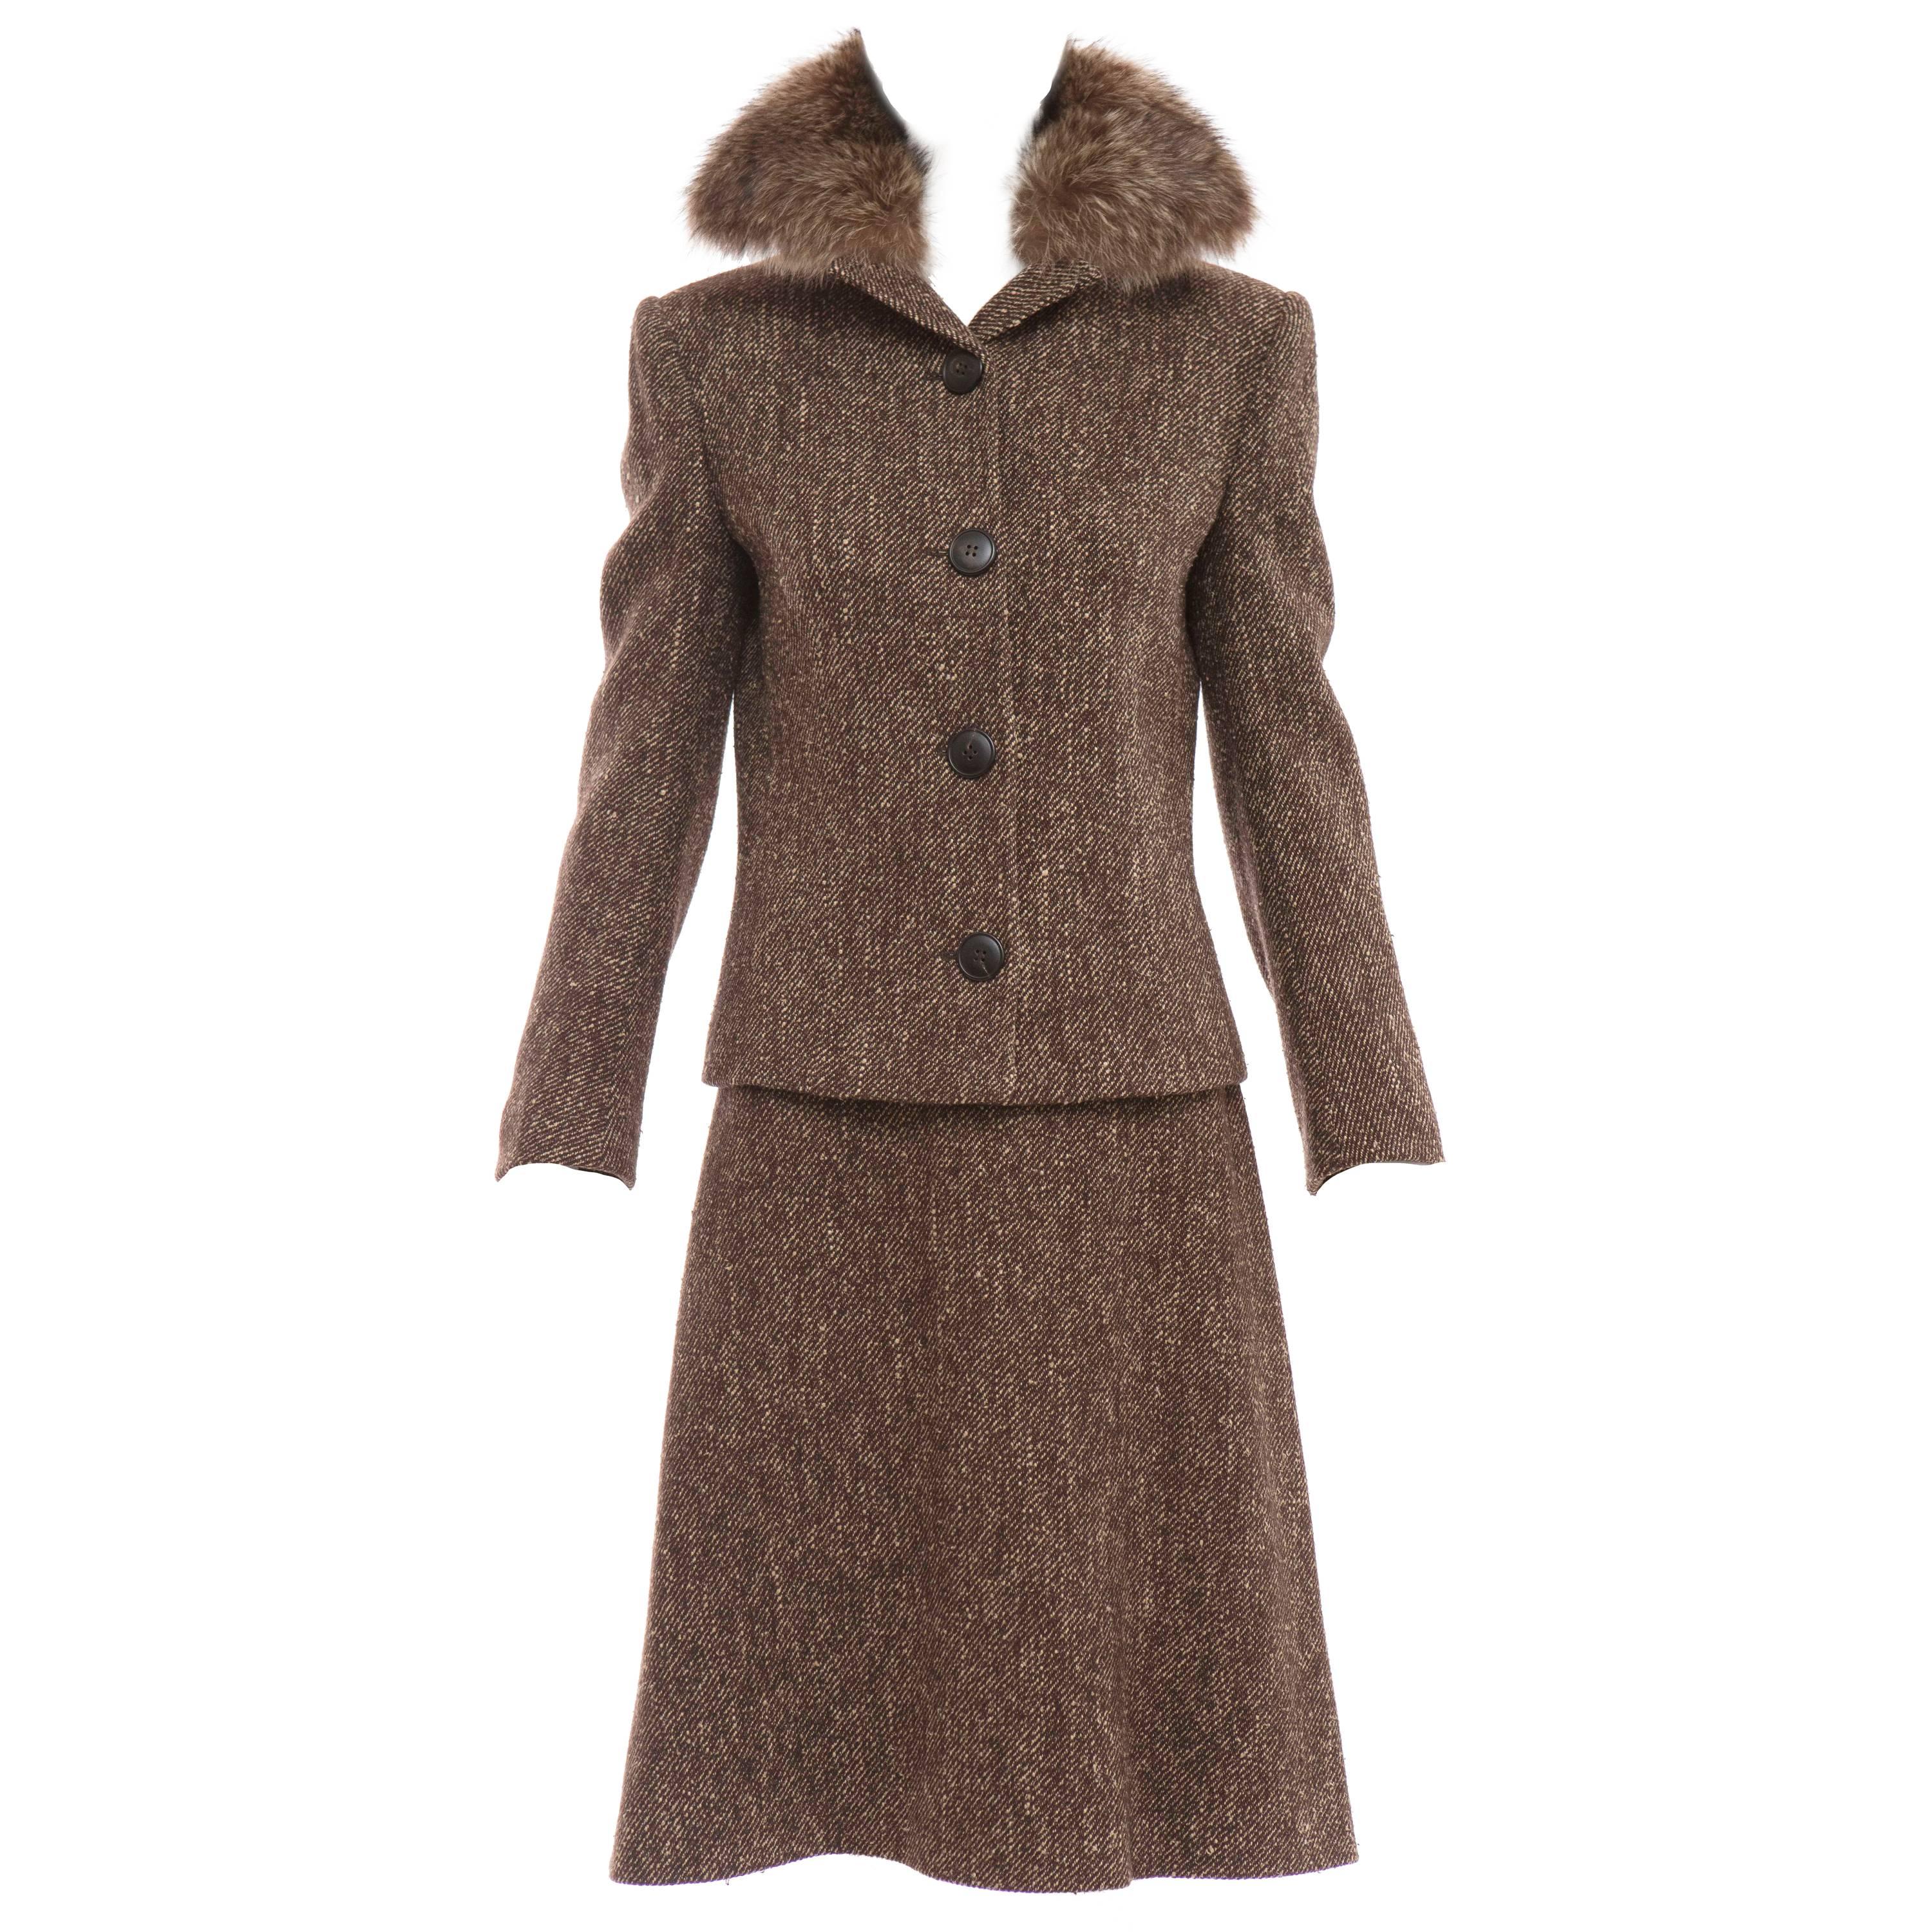 Dolce & Gabbana Brown Tweed Skirt Suit With Fur Collar For Sale